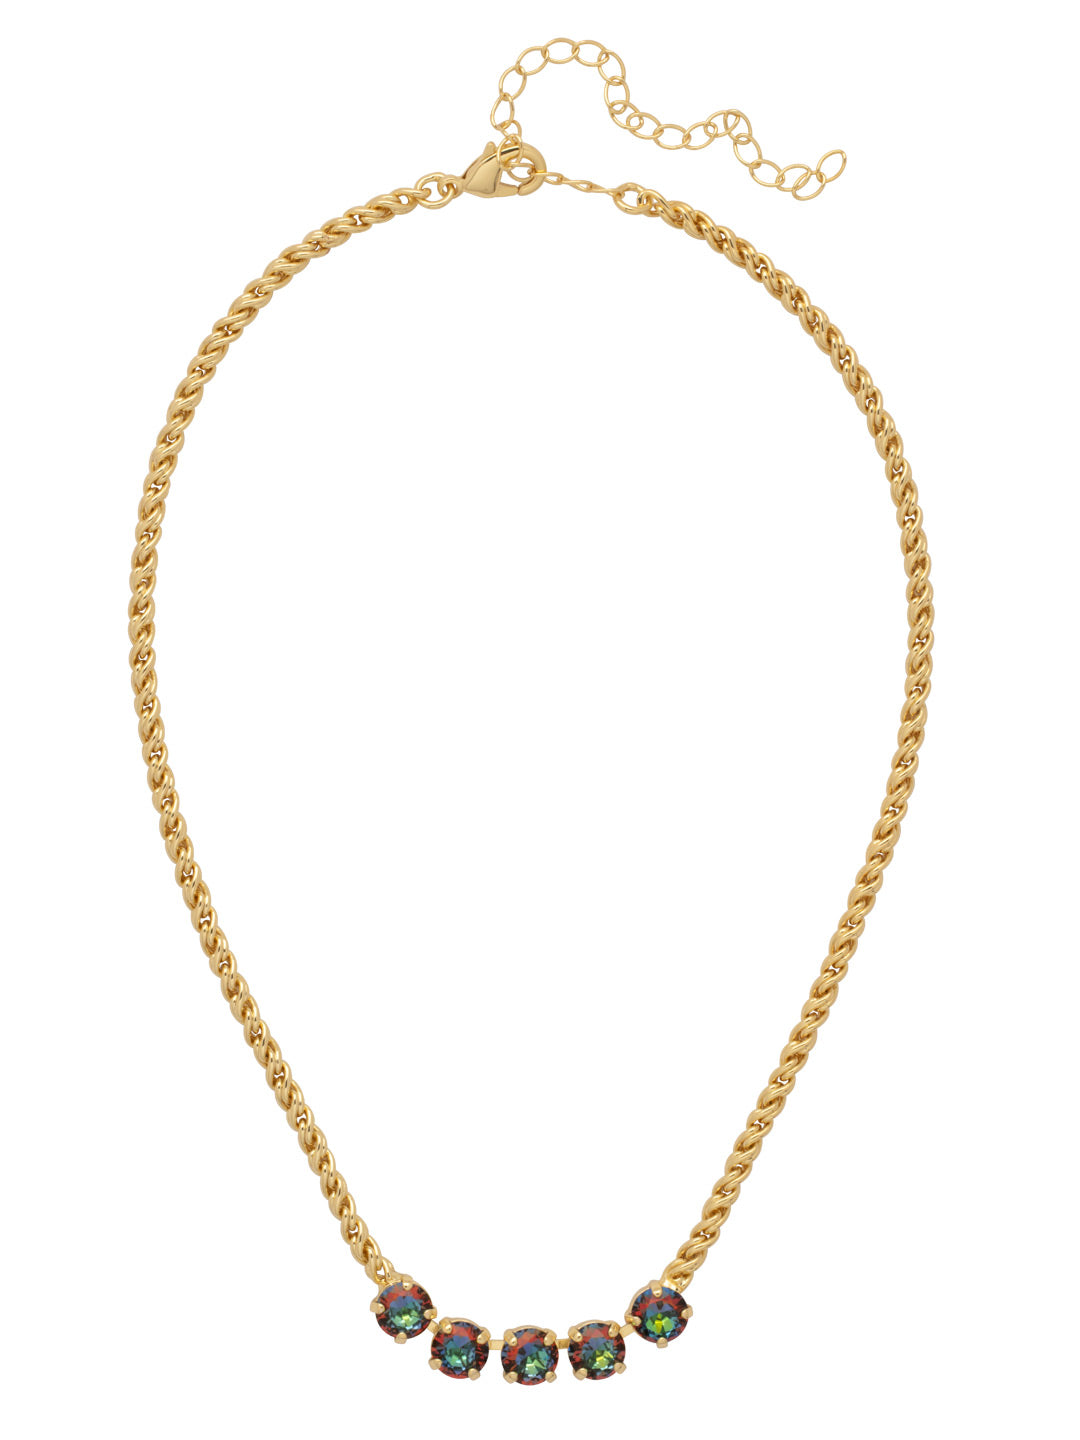 Shannon Tennis Necklace - NFL1BGVO - <p>The Shannon Tennis Necklace features a line of five round cut crystals on an adjustable rope chain, secured by a lobster claw clasp. From Sorrelli's Volcano collection in our Bright Gold-tone finish.</p>